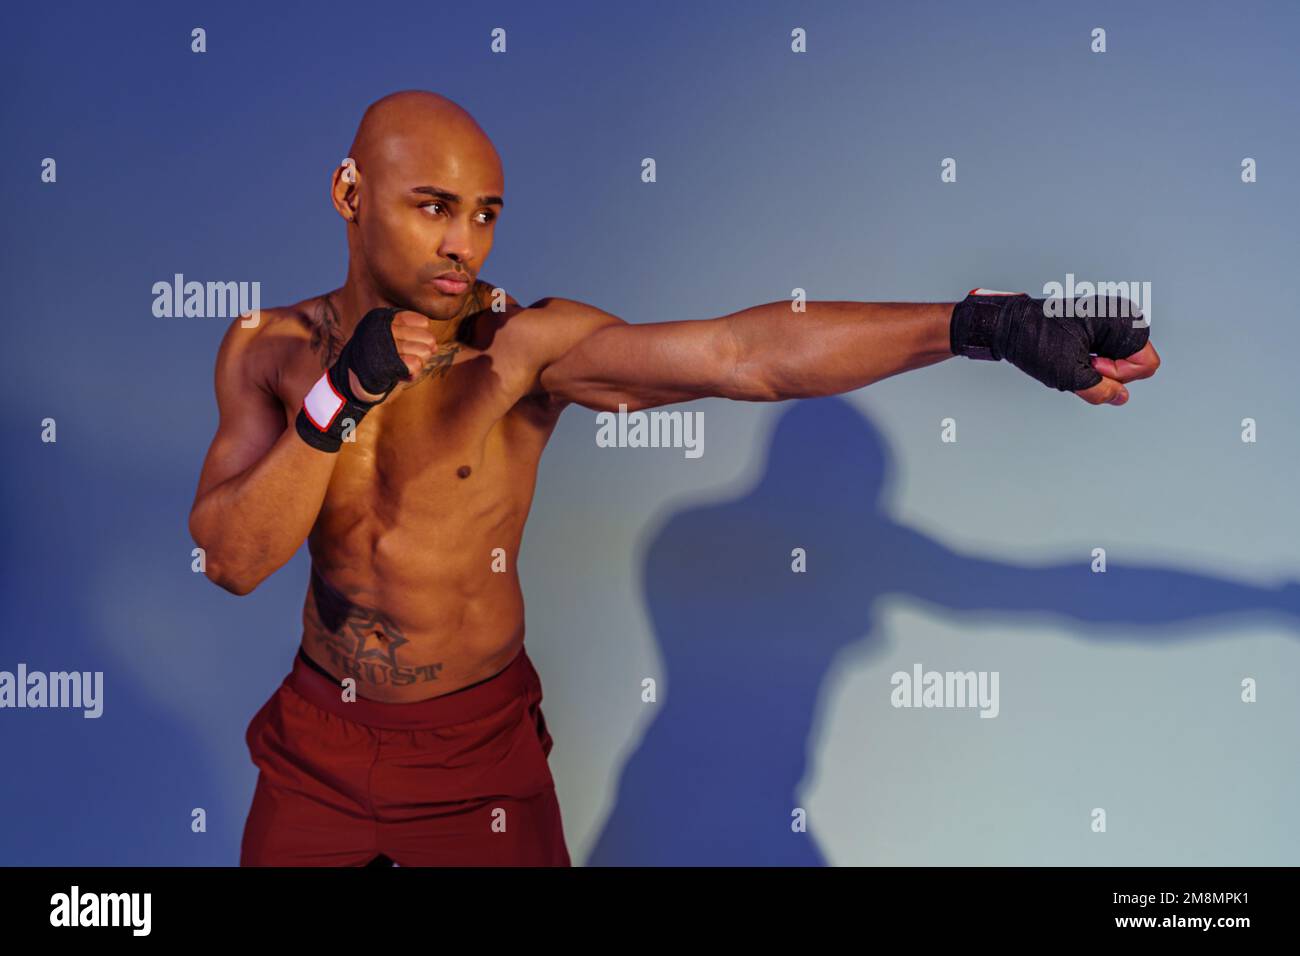 Professional kickboxer is training and practicing punch on studio background with shadows Stock Photo